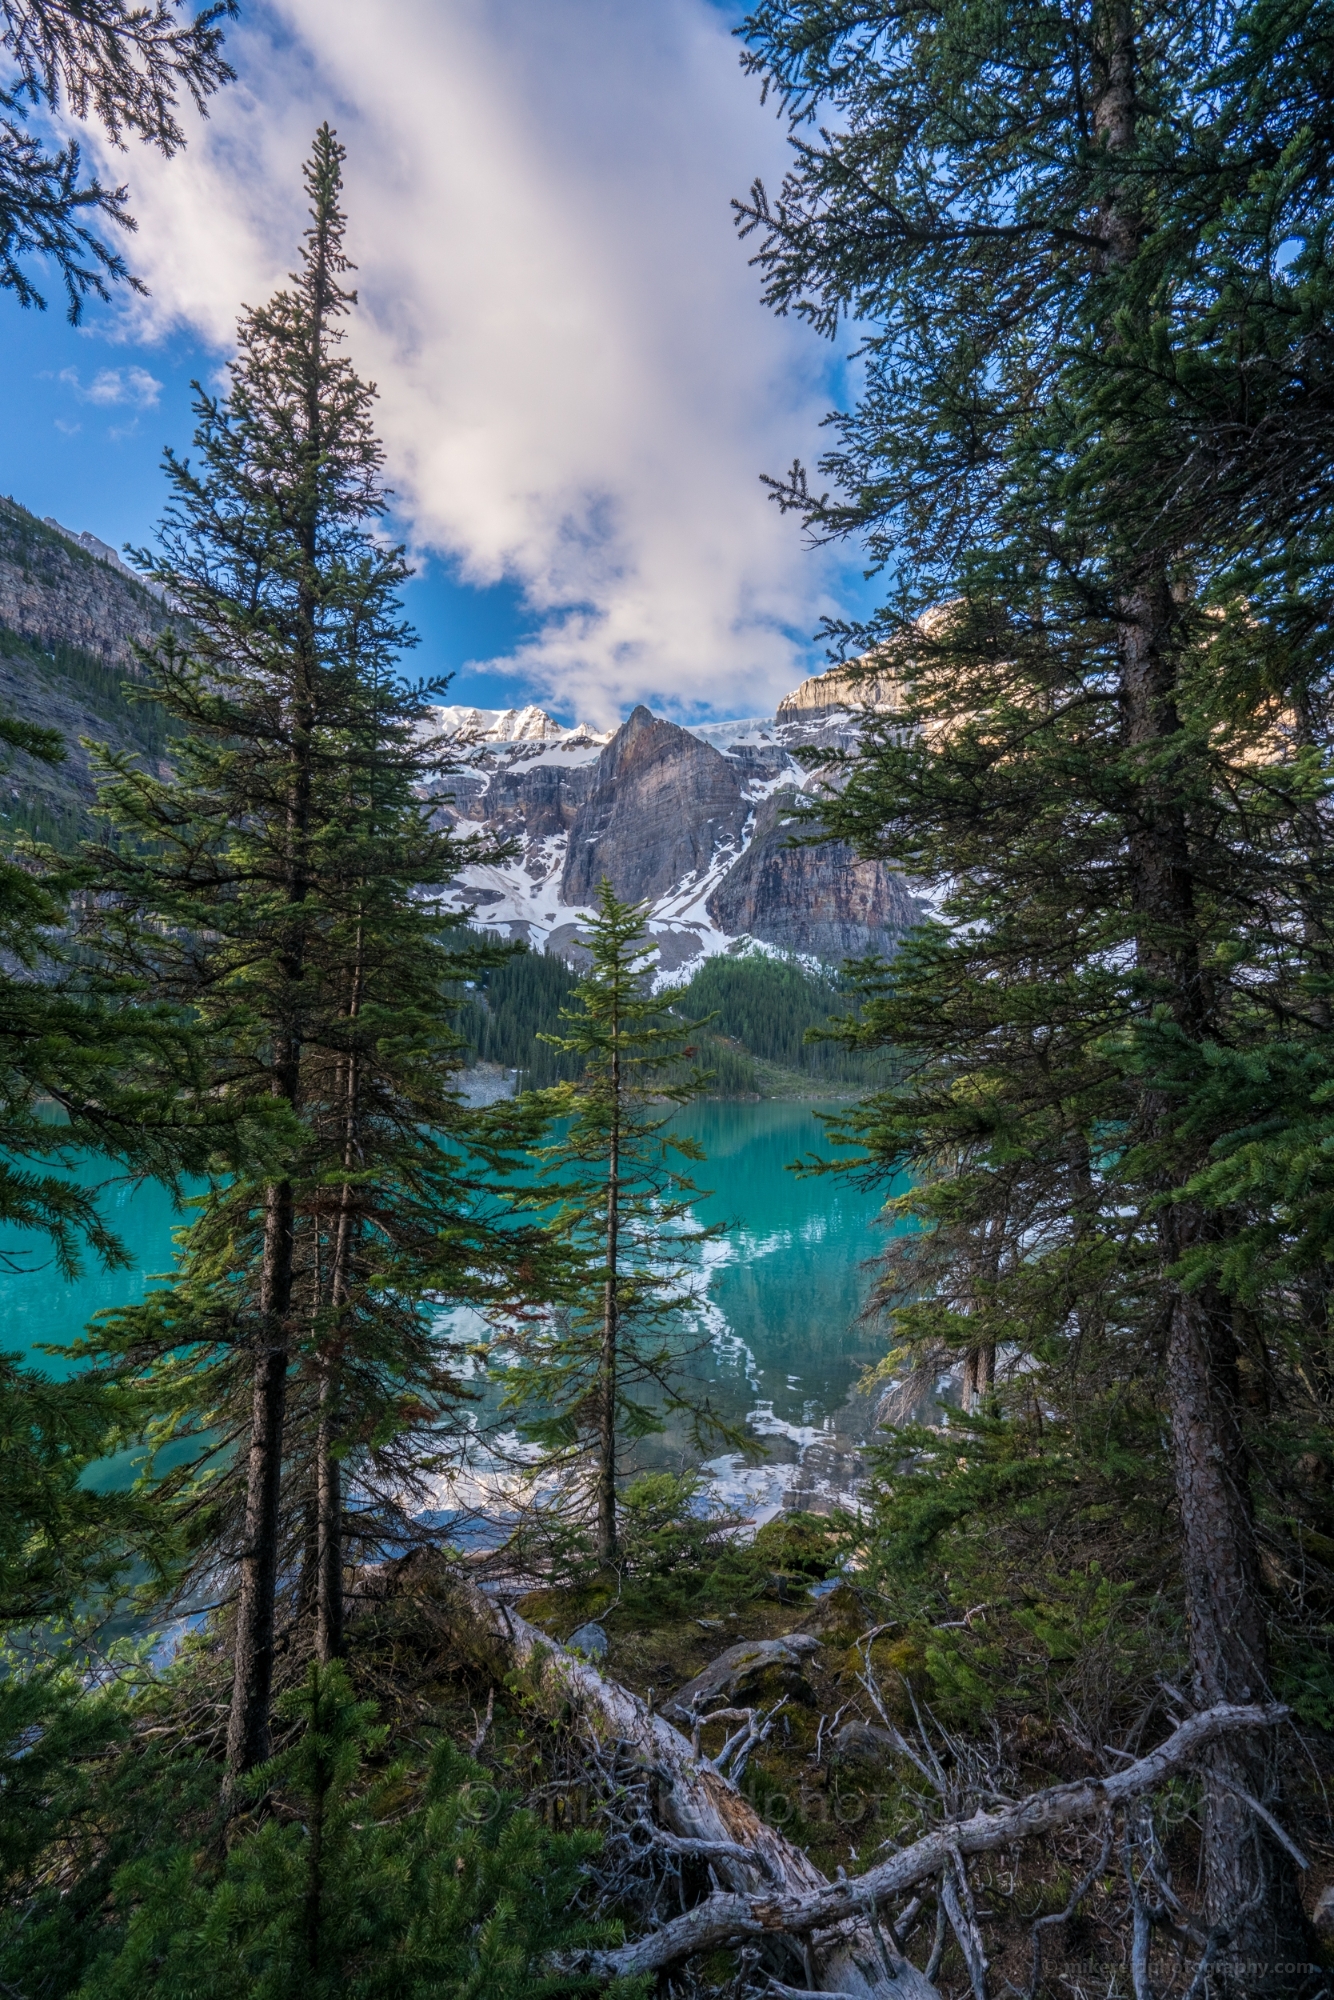 Lake Moraine Reflection Through the Forest